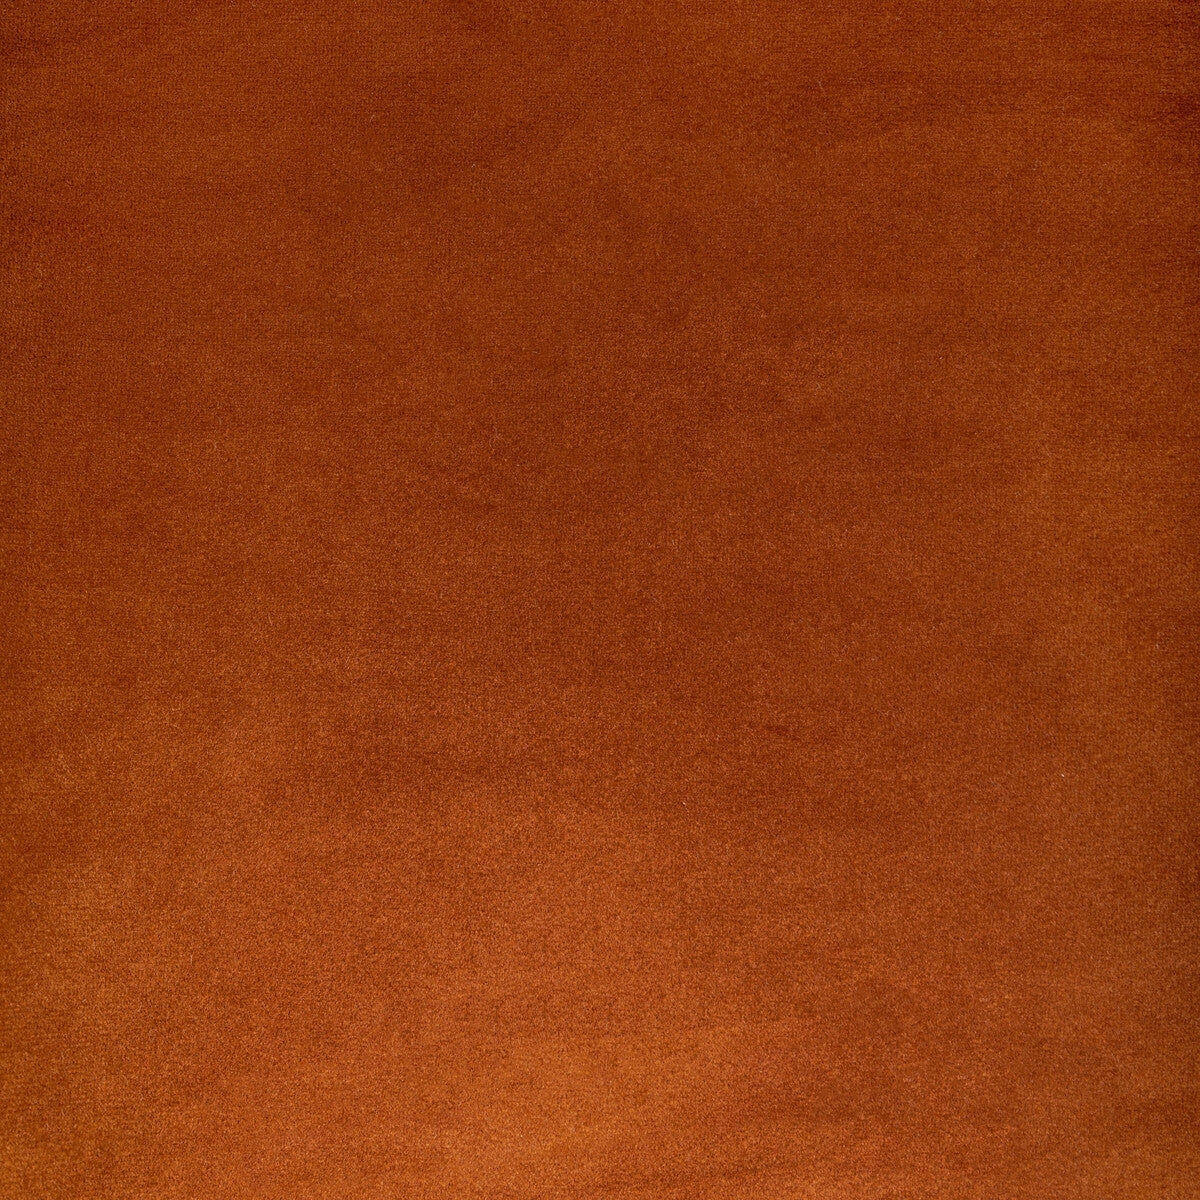 Rocco Velvet fabric in spice color - pattern KW-10065.3685MG45.0 - by Kravet Contract